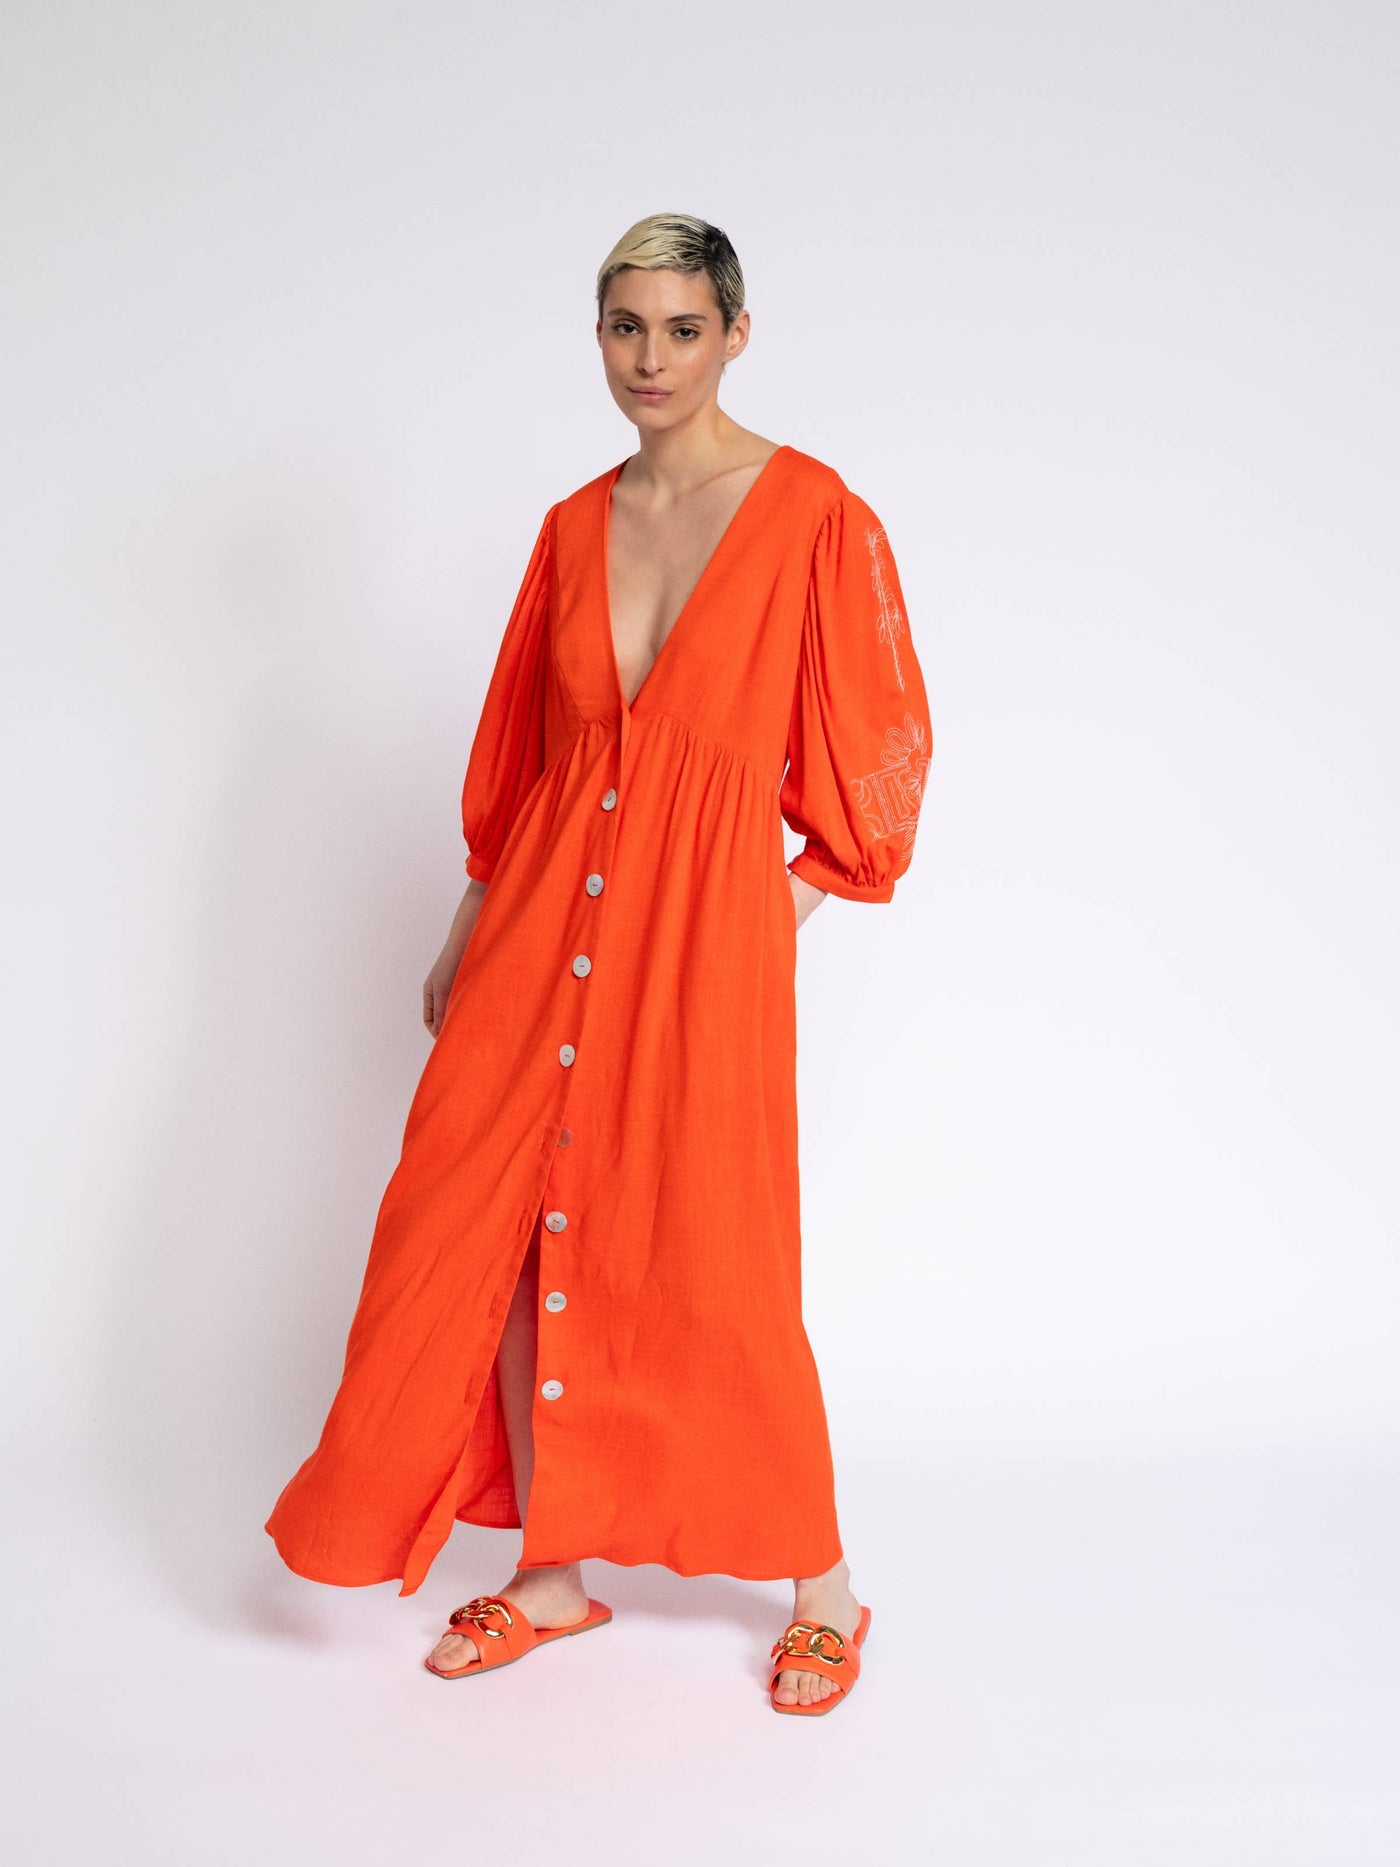 Red orange dress with embroidery on the sleeves